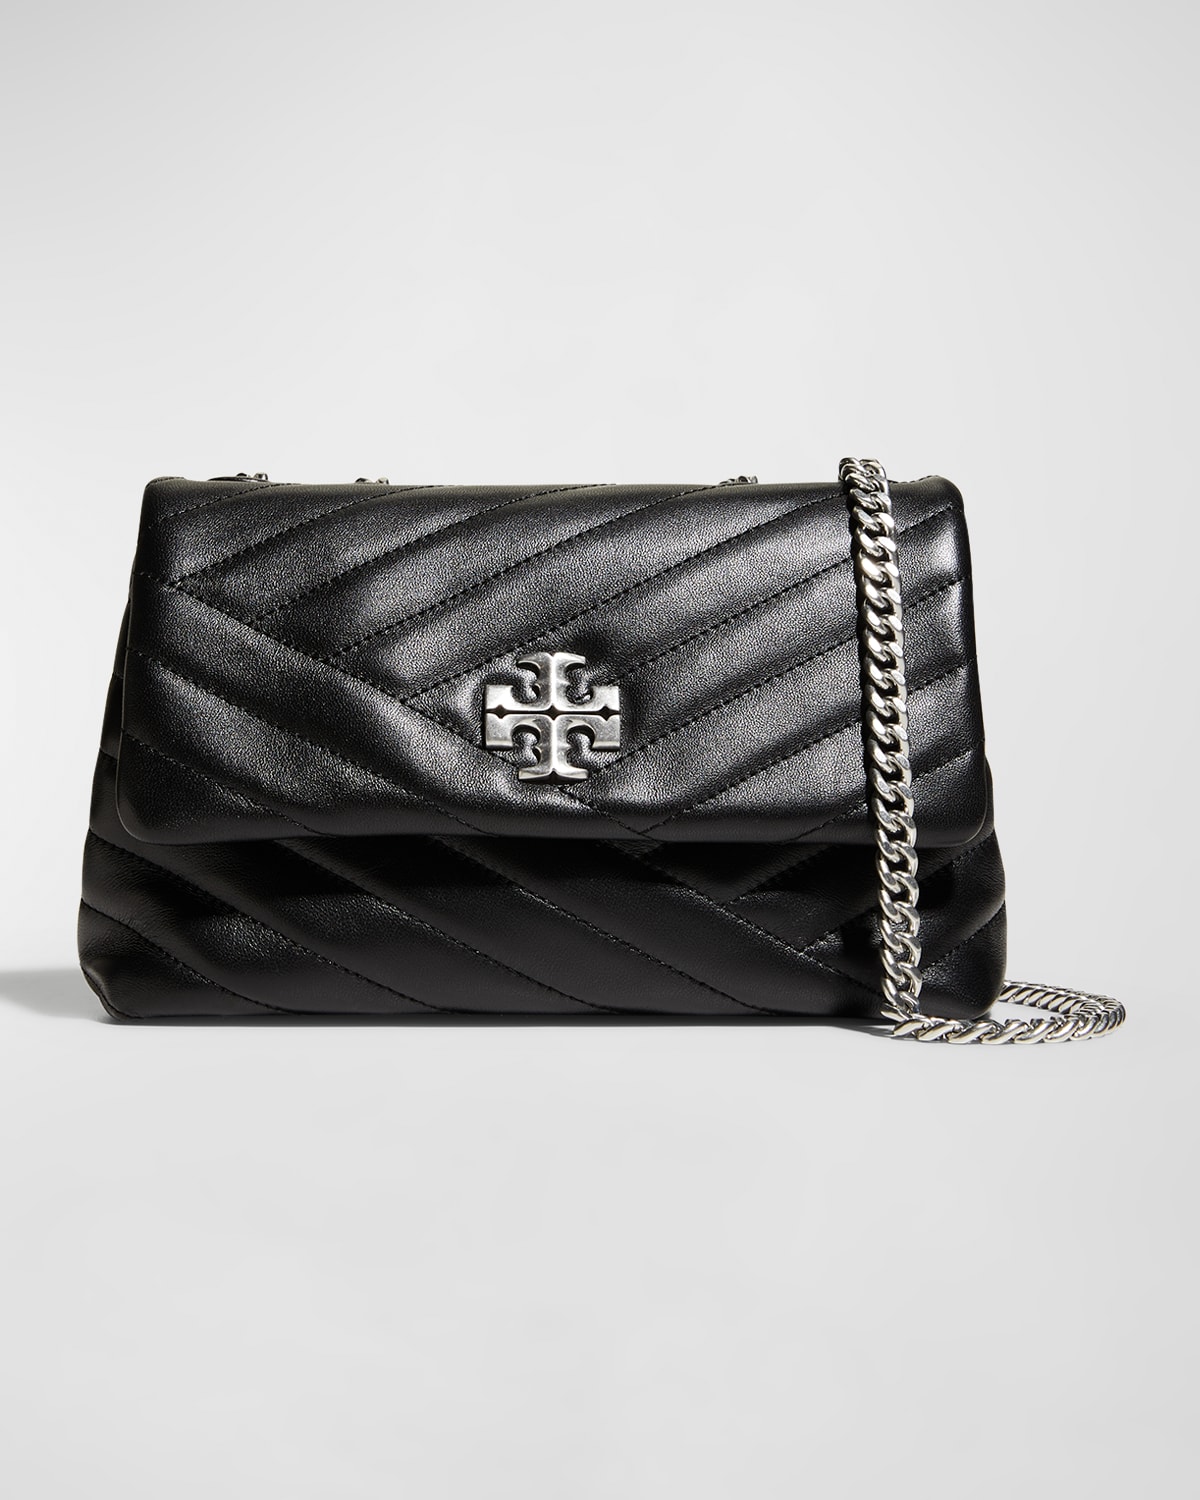 Tory Burch Kira Chevron Small Covertible Shoulder Bag In Blk Rolled Nickel